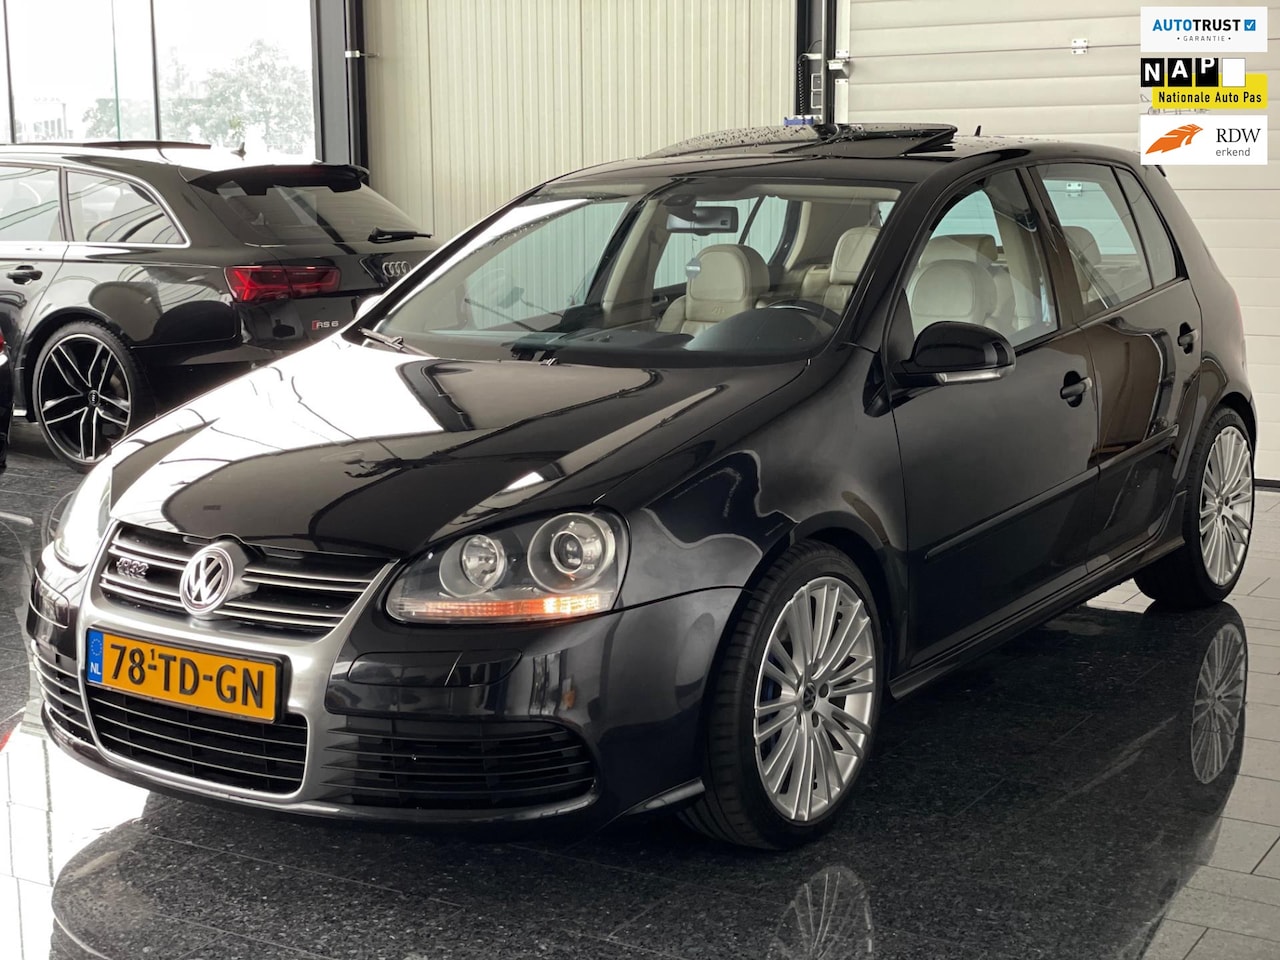 stoeprand Schurk halfgeleider volkswagen golf black 3.vr6 used – Search for your used car on the parking